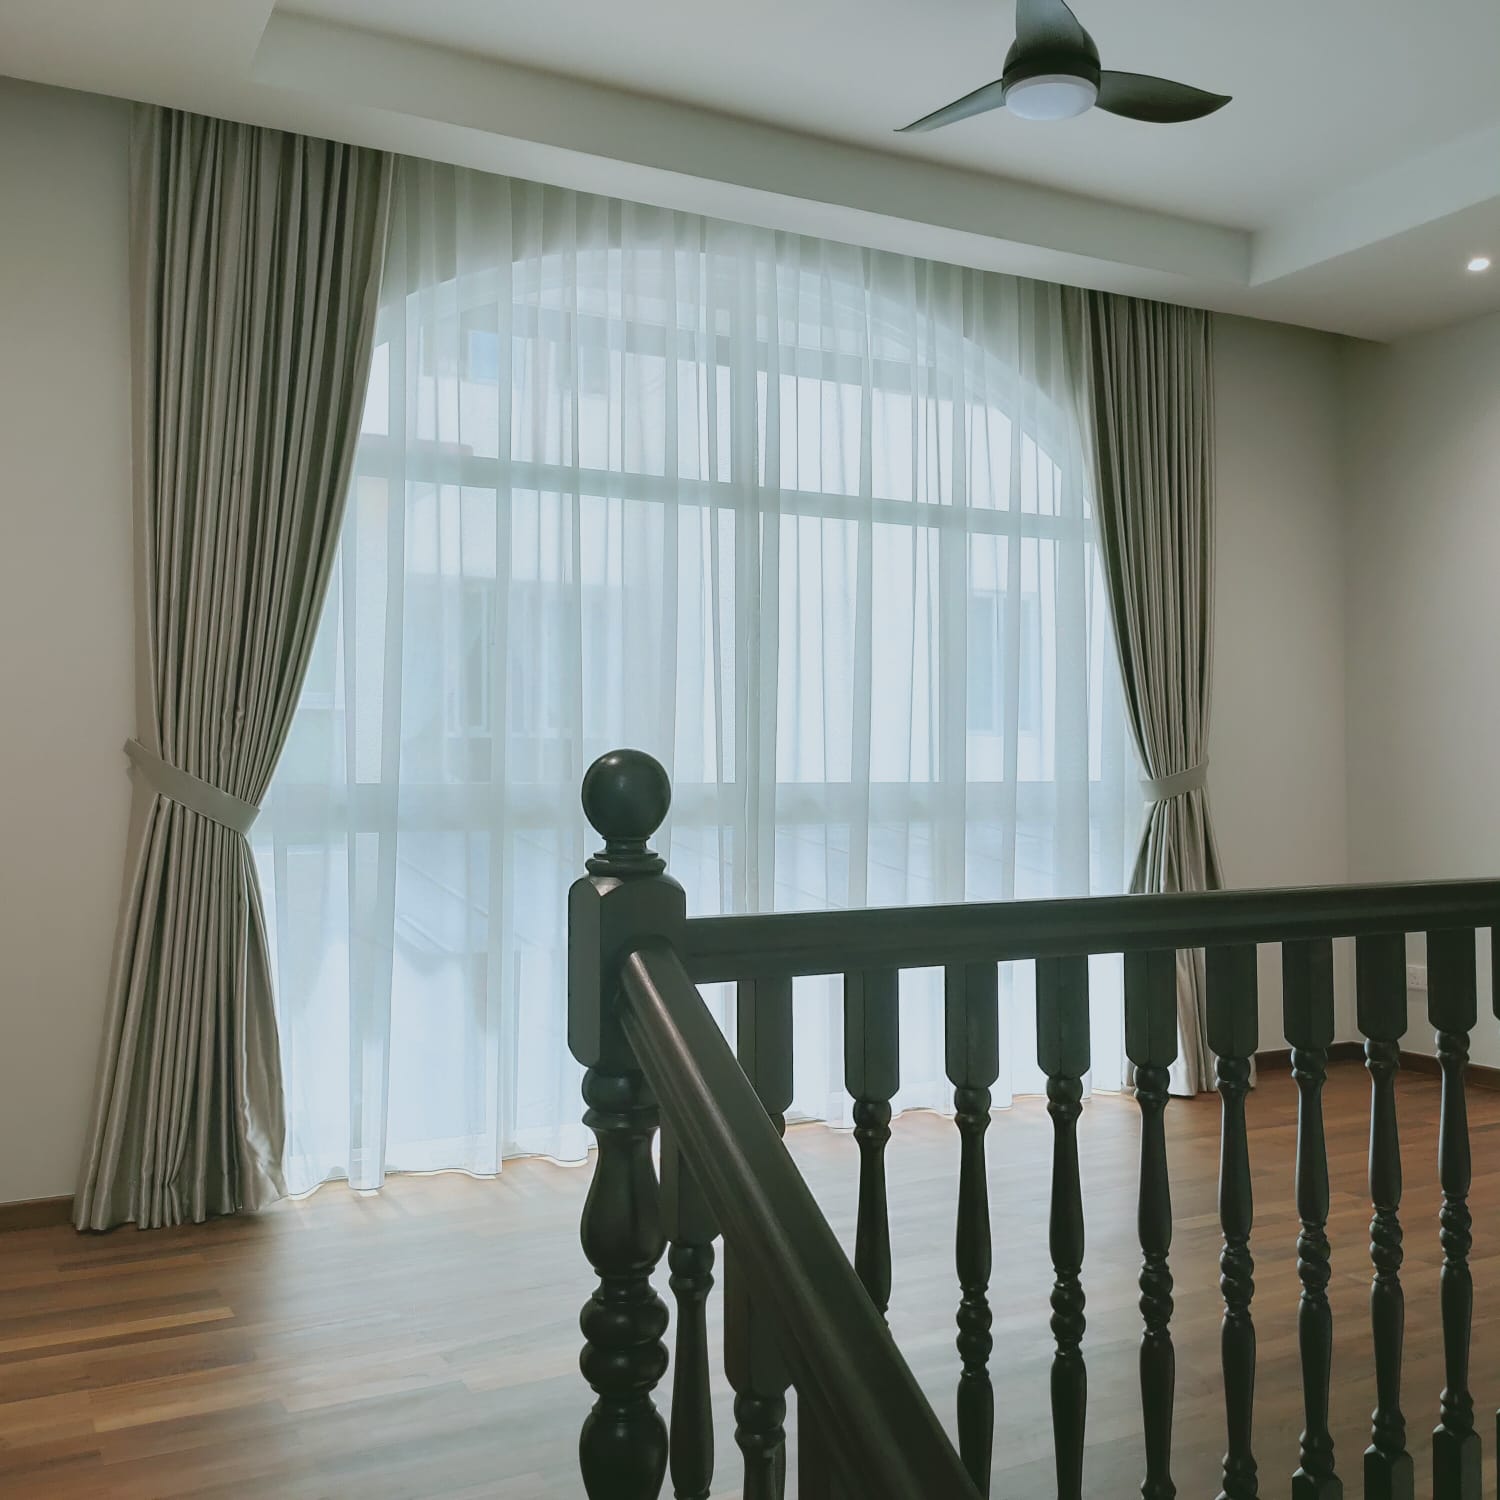 This is a Picture of Day and night curtain picture  for Singapore landed house, 2nd floor, day and night curtain, Juilee road